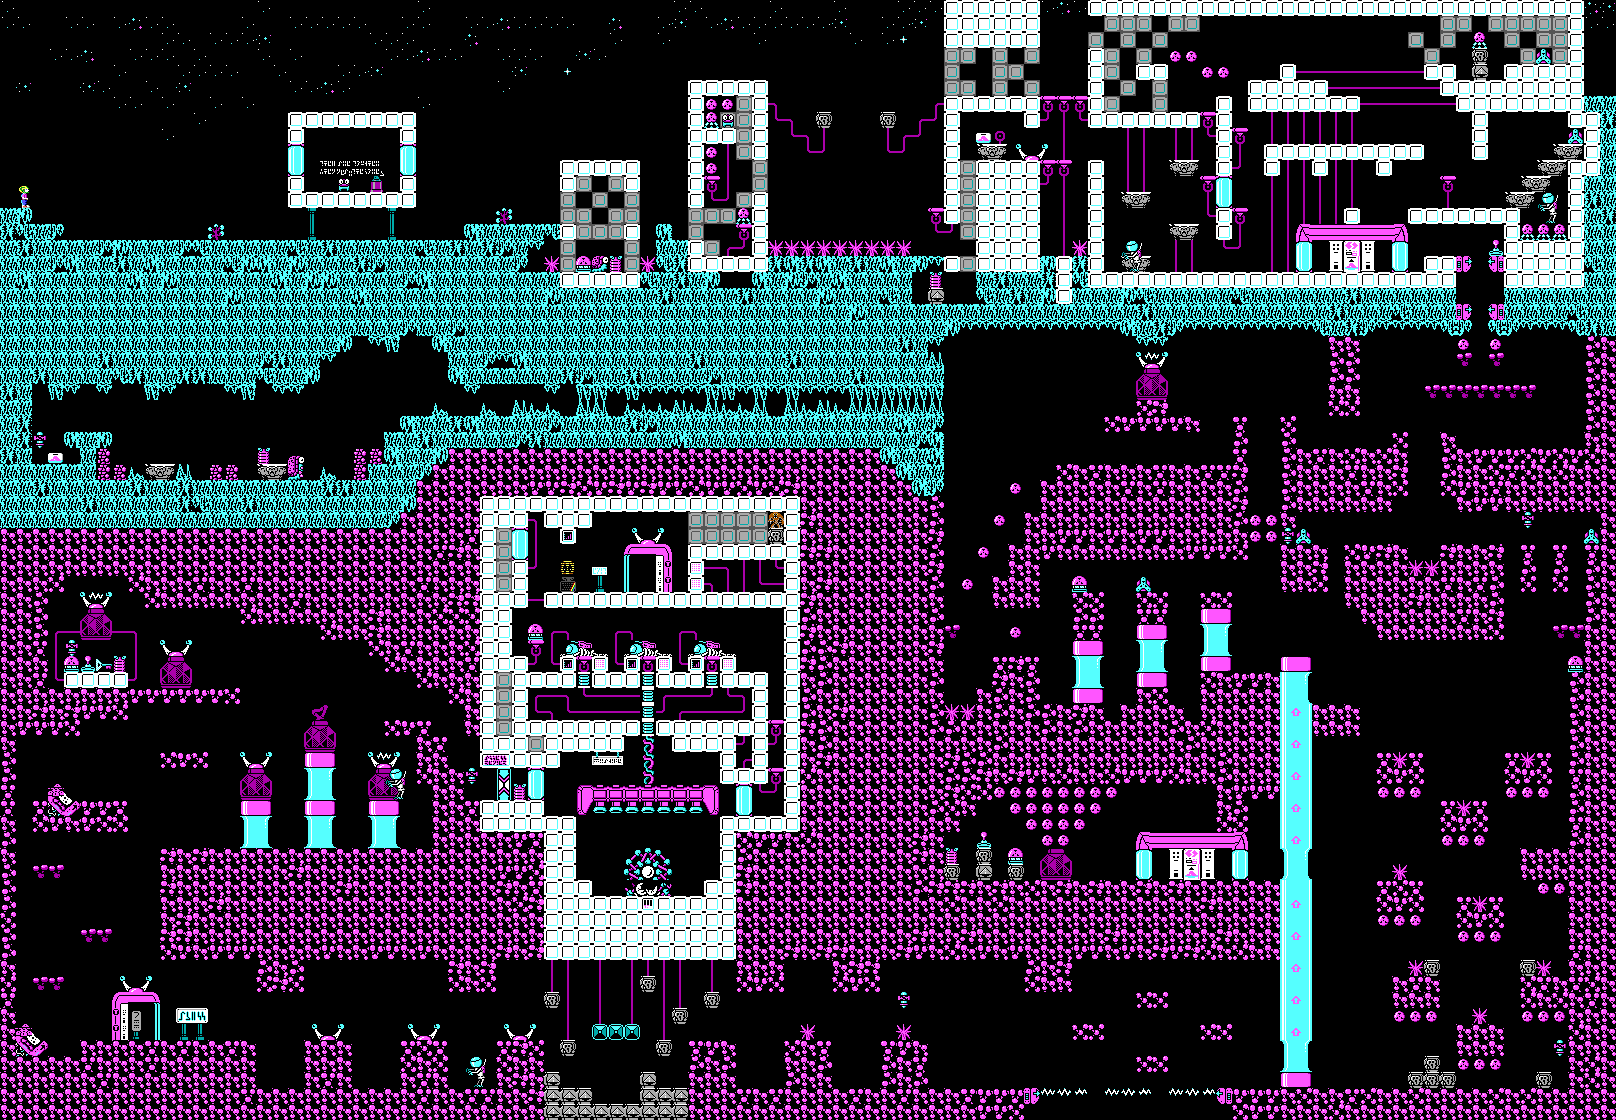 Commander Keen Confronts the Commandeered Planet - Level 14.png